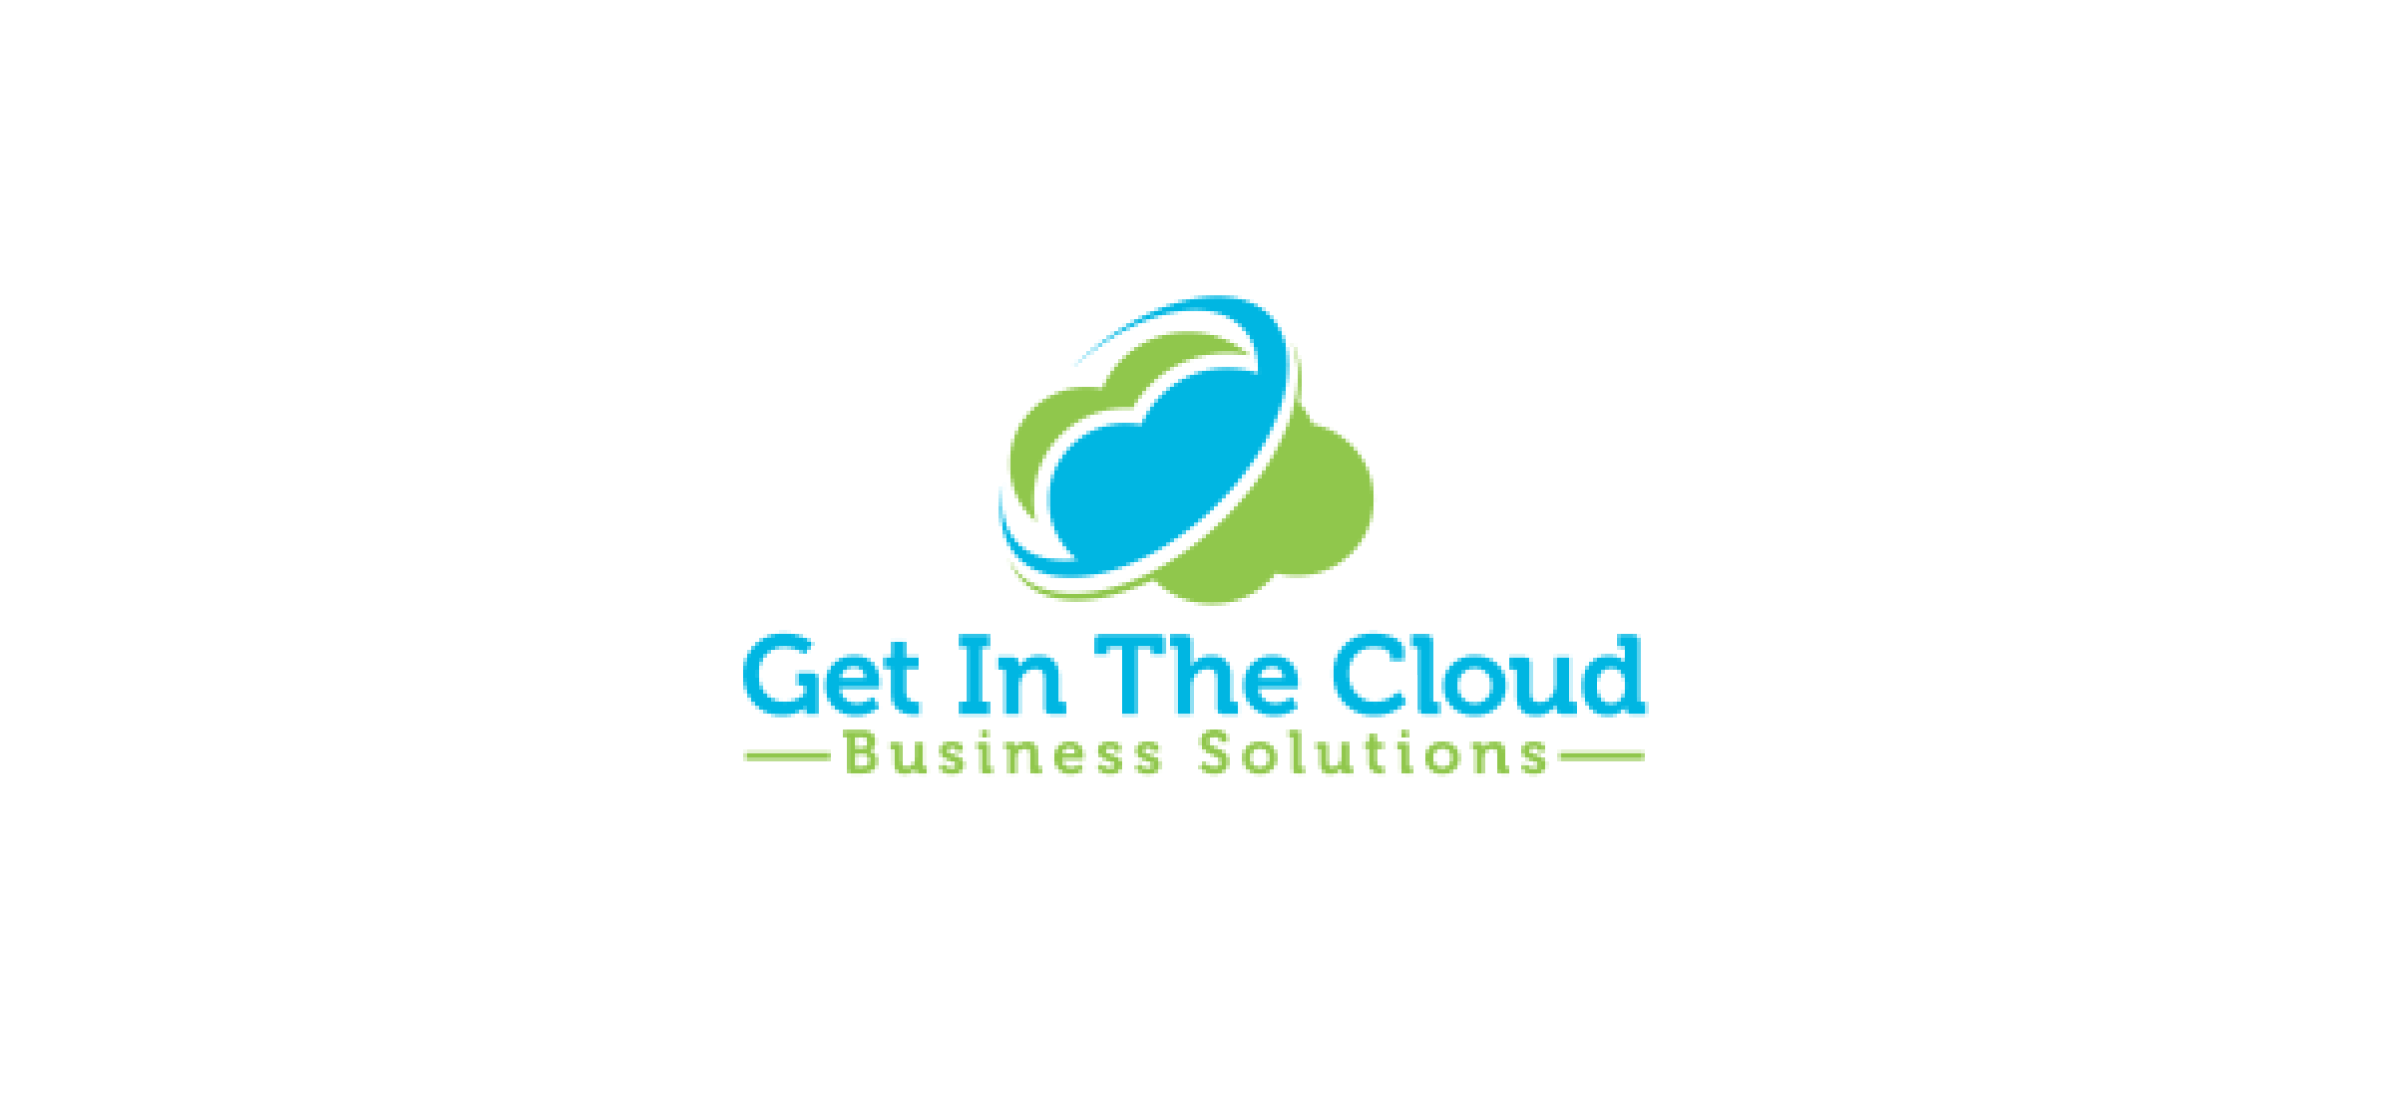 The Get In The Cloud logo